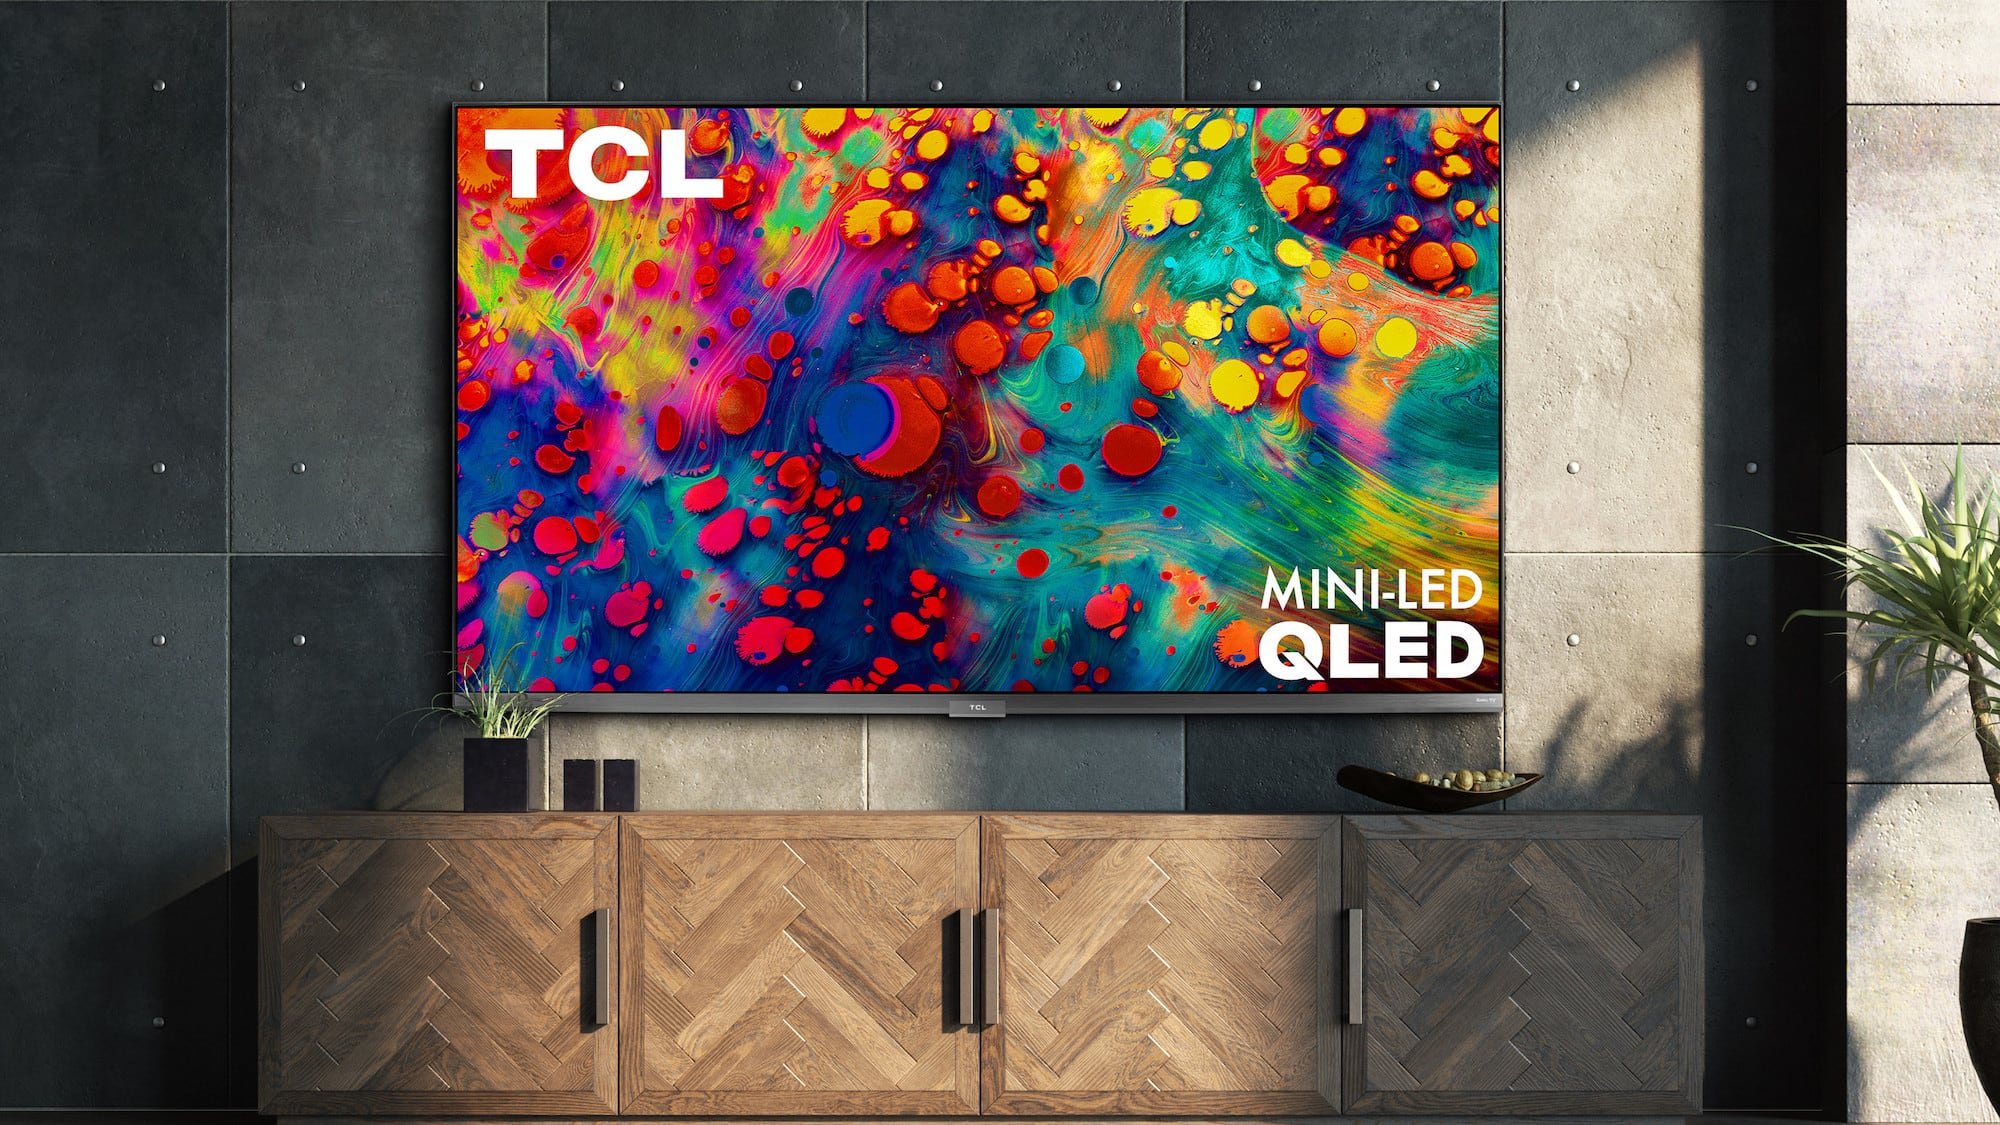 TCL 6-Series Roku TV has 4K resolution for stunning detail